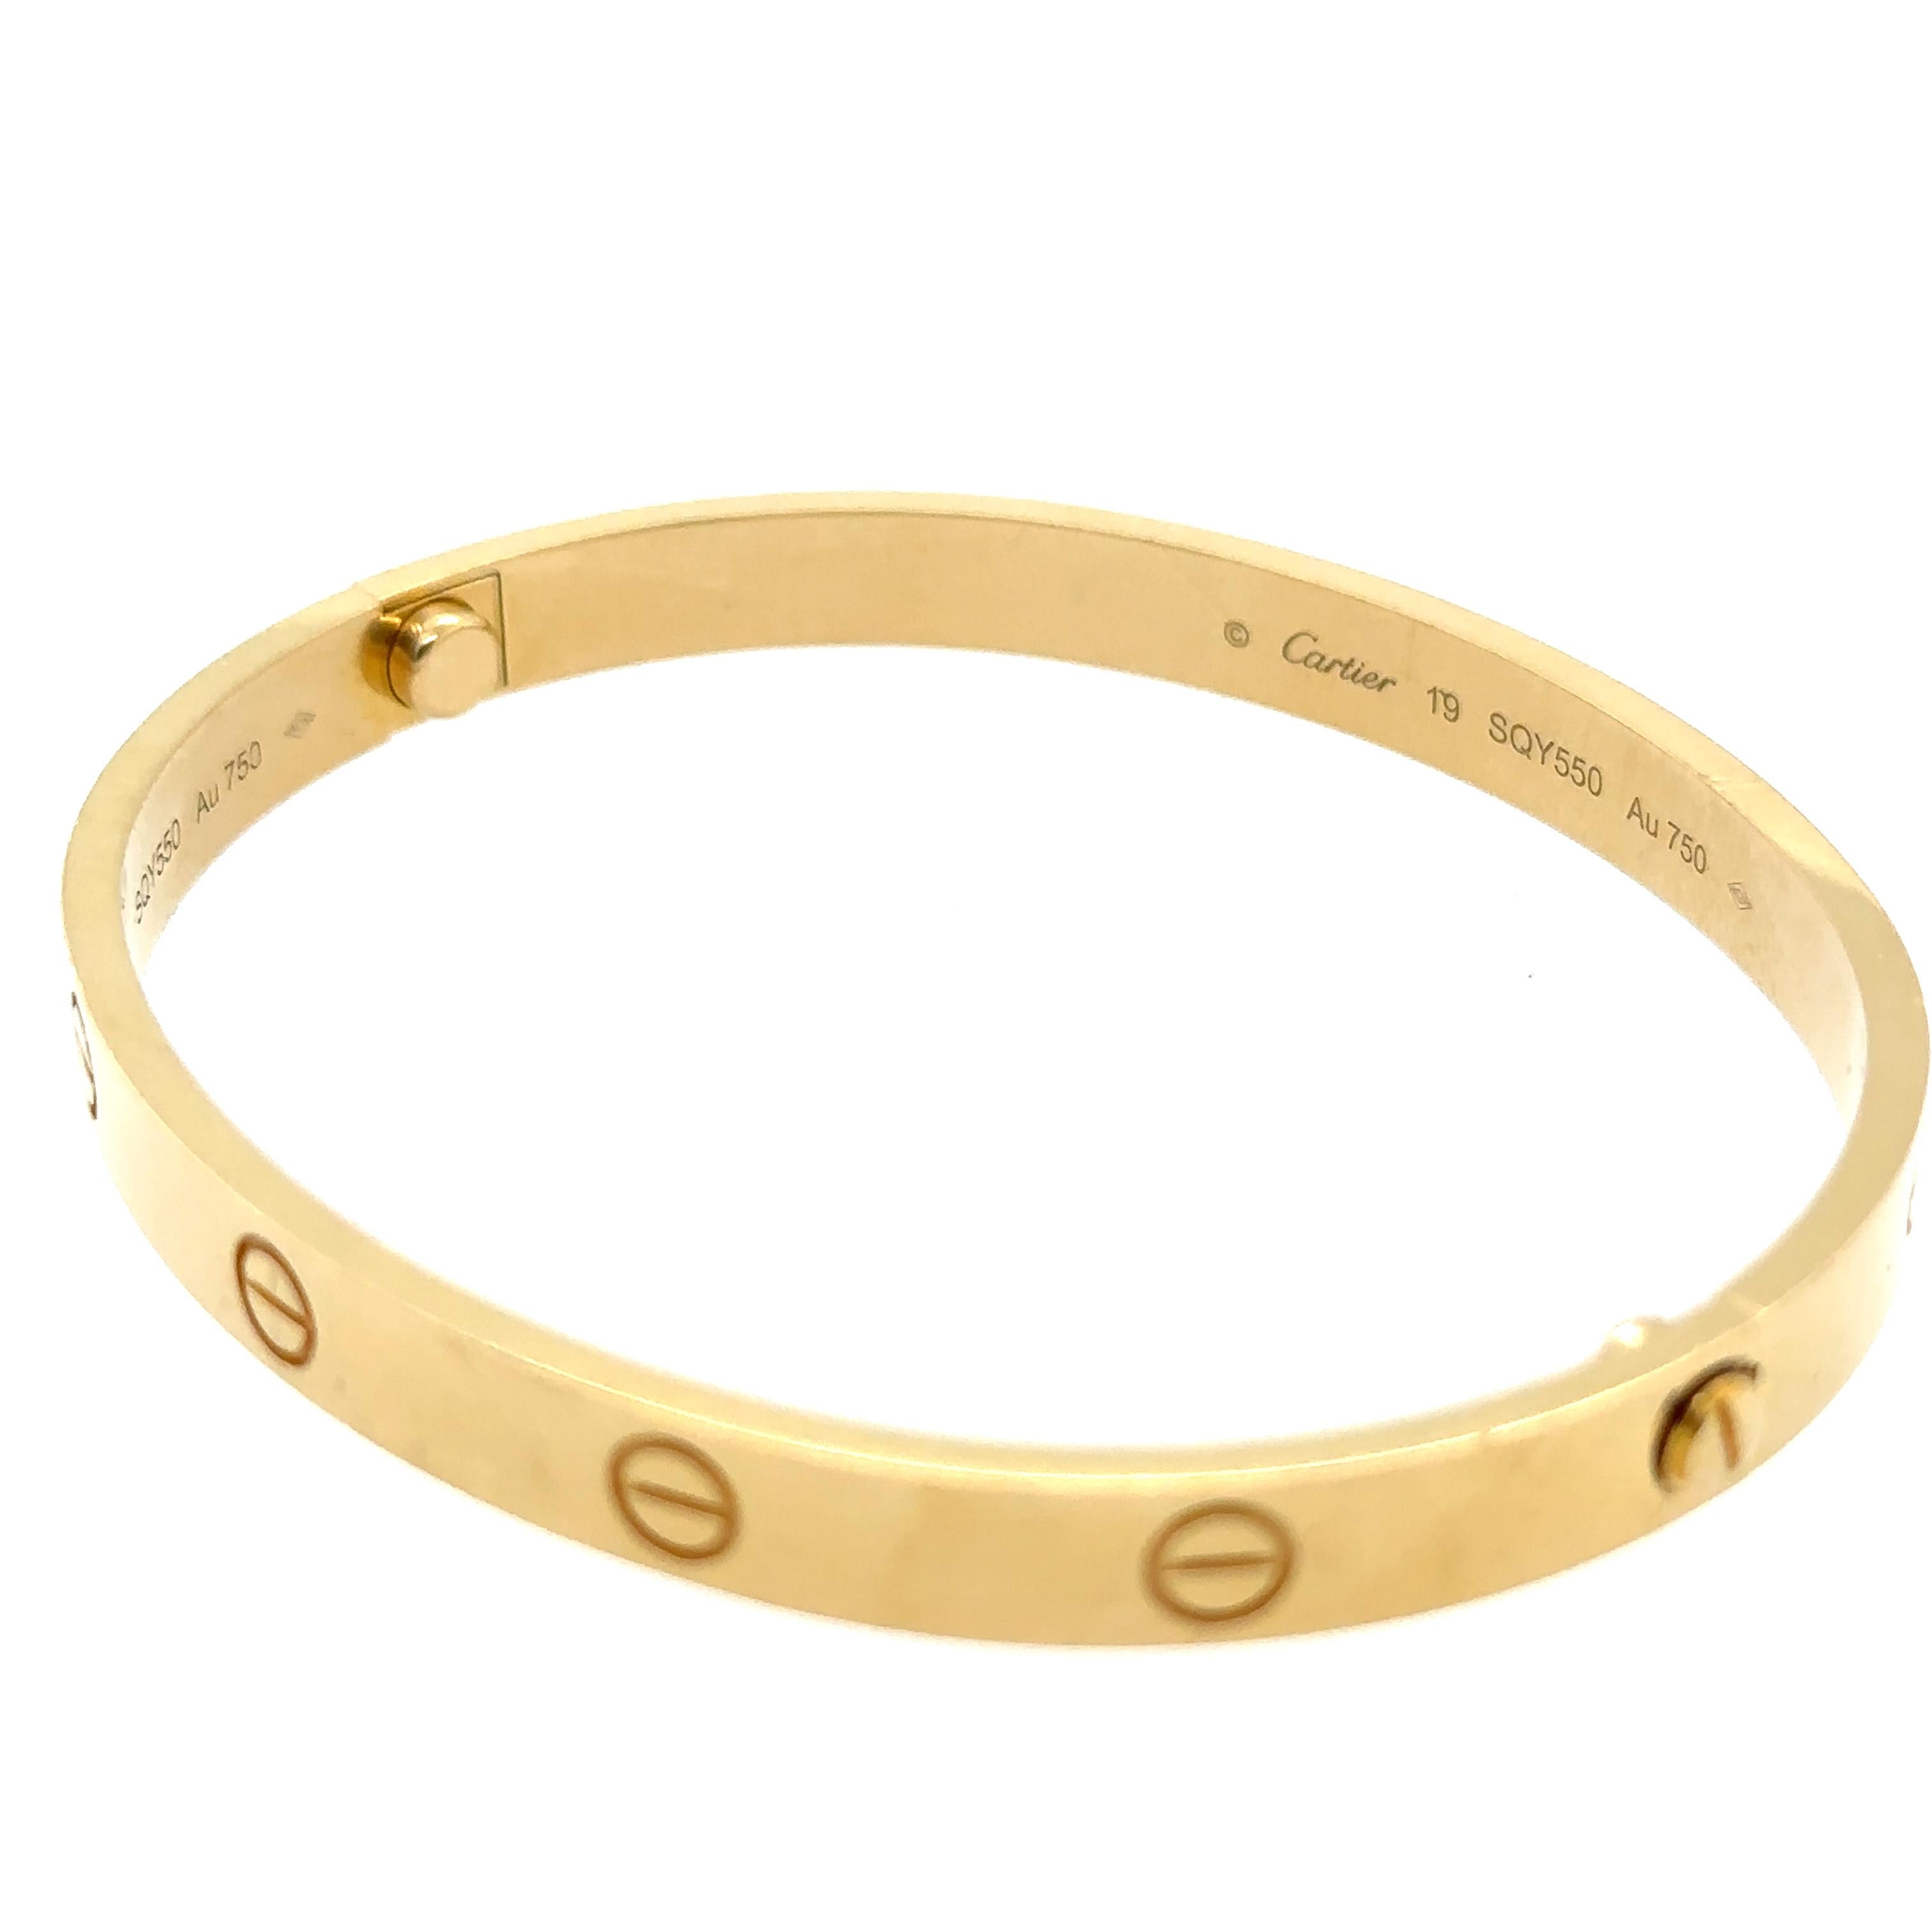 A Cartier 18ct Yellow Gold Love Bangle.

Width 6mm. Serial number: SQY550, Size 19cm. Weight 36.41 grams.

Reference: CRB6067519

Metal: 18ct Yellow Gold
Carat: N/A
Colour: N/A
Clarity:  N/A
Cut: N/A
Weight: 36.41 grams
Engravings/Markings: Cartier